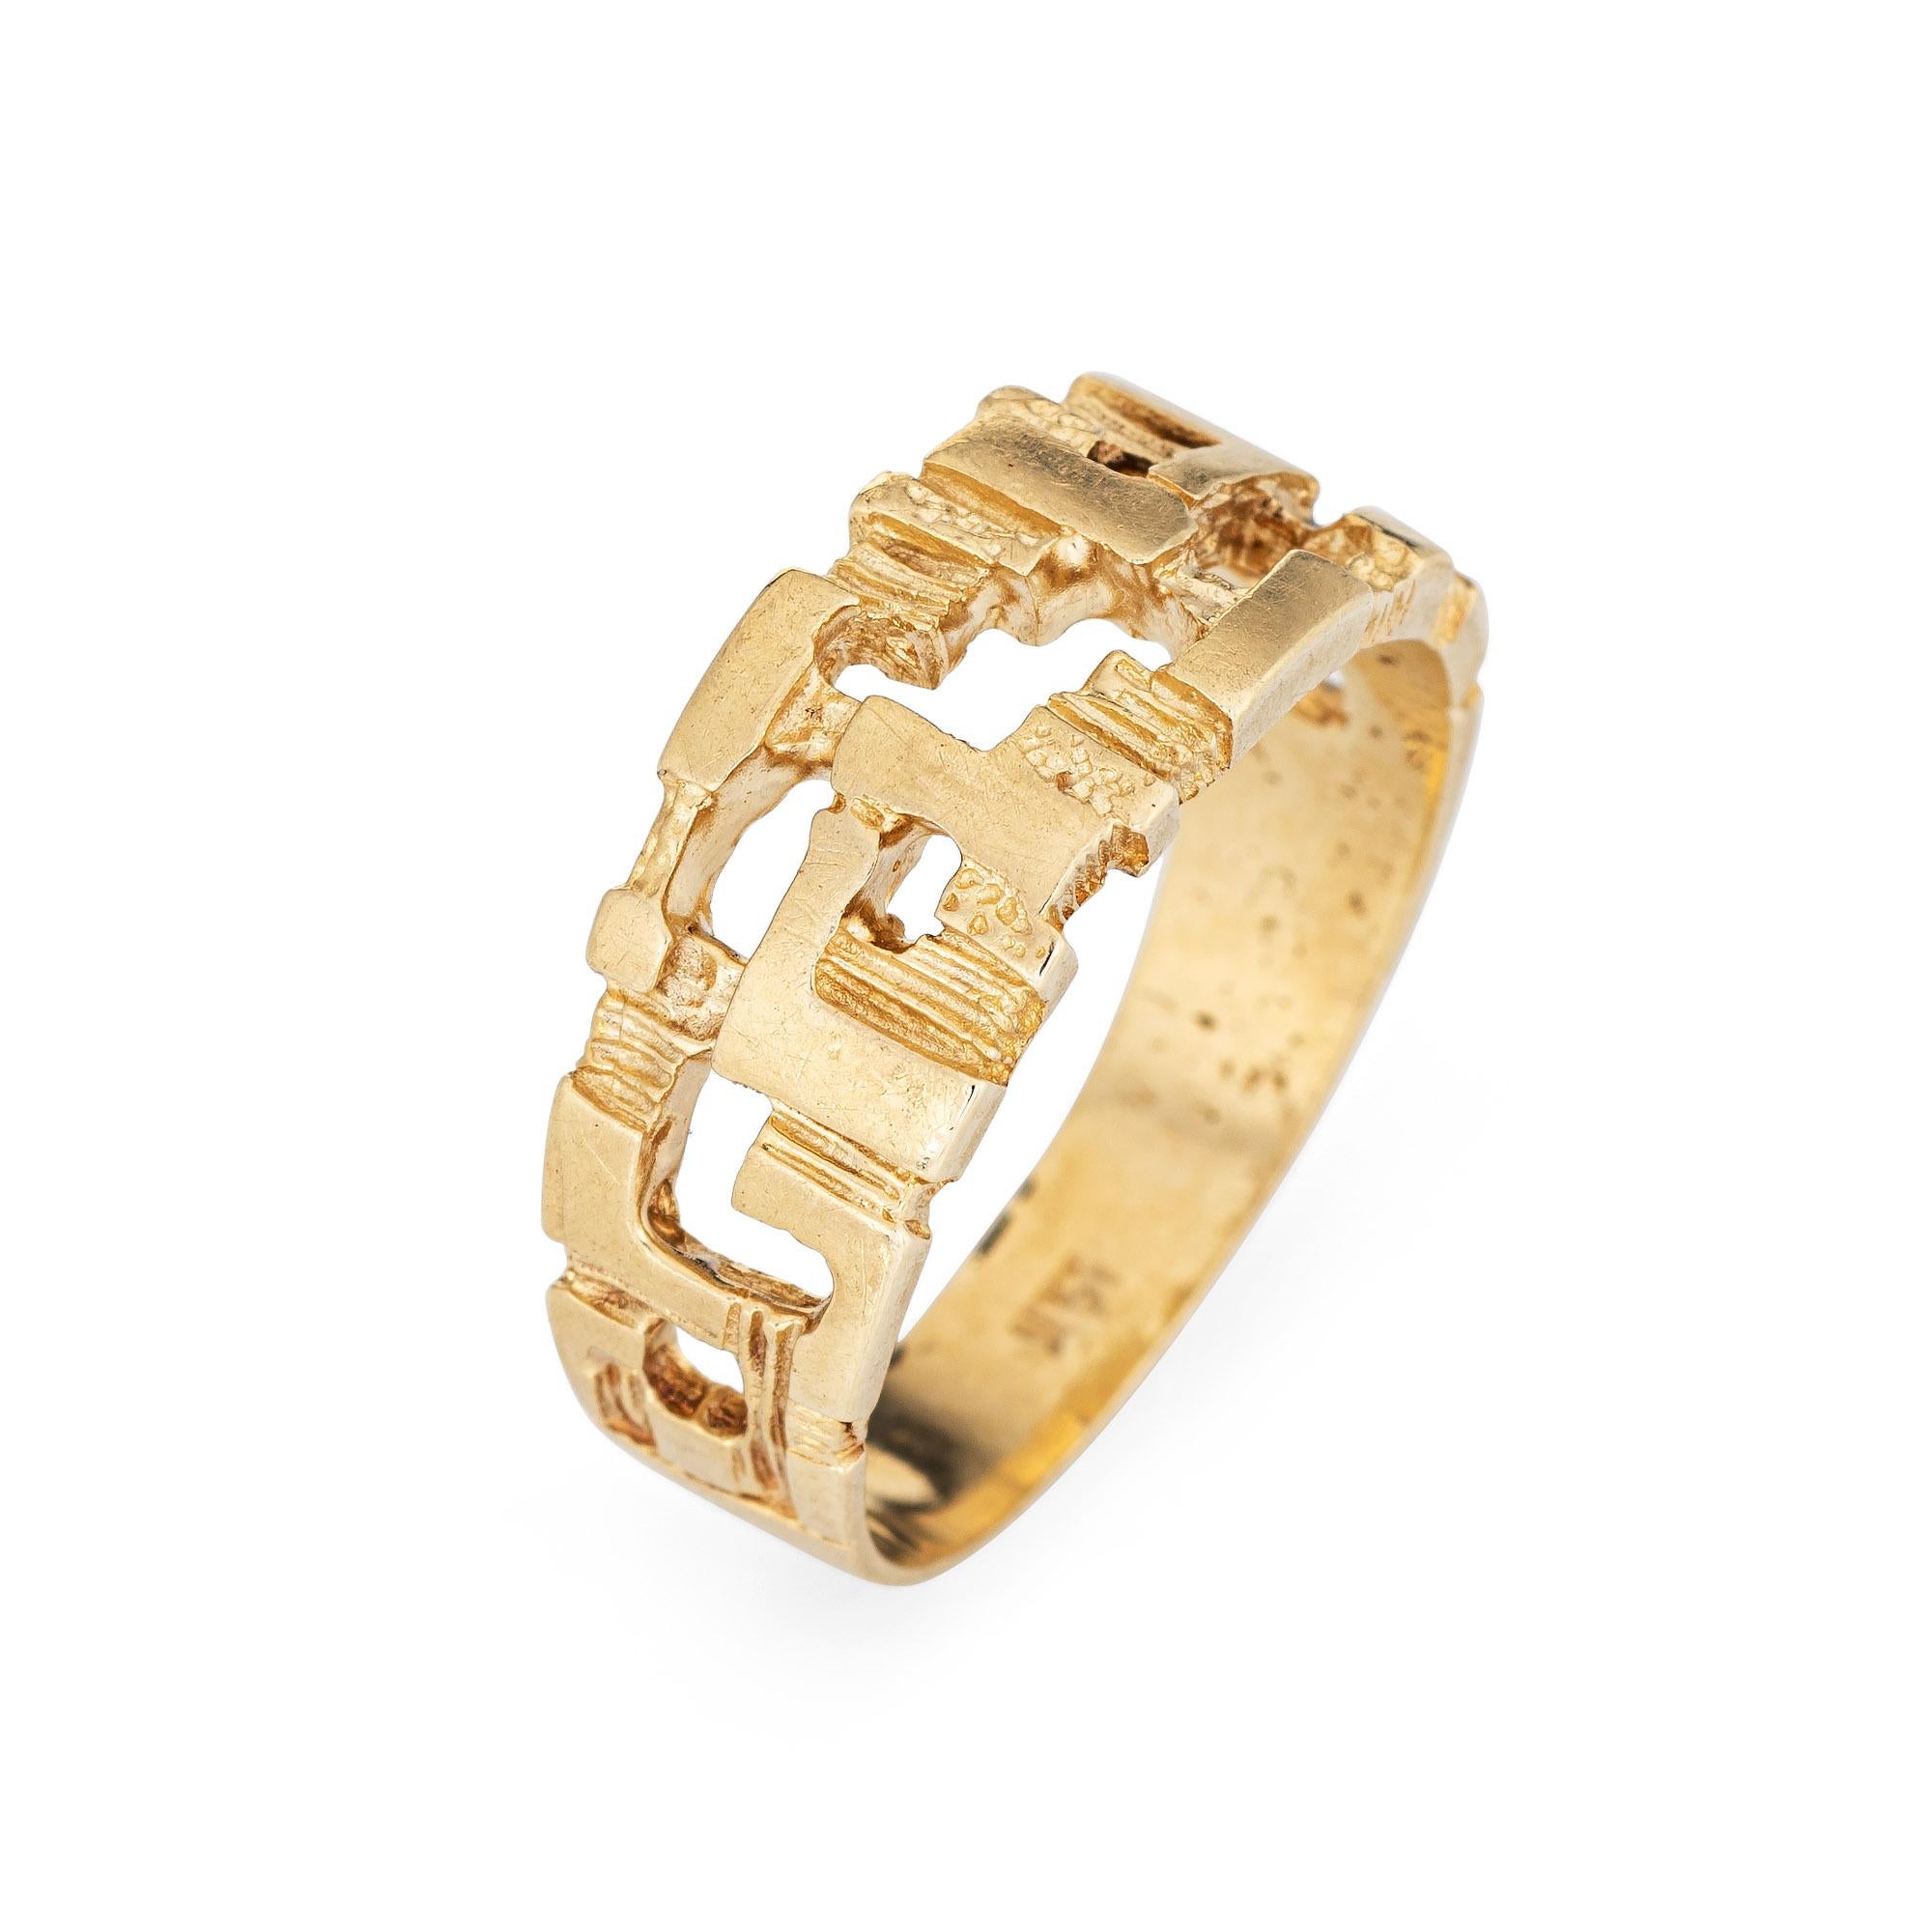 Stylish vintage abstract ring (circa 1970s) crafted in 14 karat yellow gold. 

The distinct ring features a fun abstract design, great for wear alone or stacked with your fine jewelry from any era. The low rise ring (2.5mm - 0.09 inches) sits